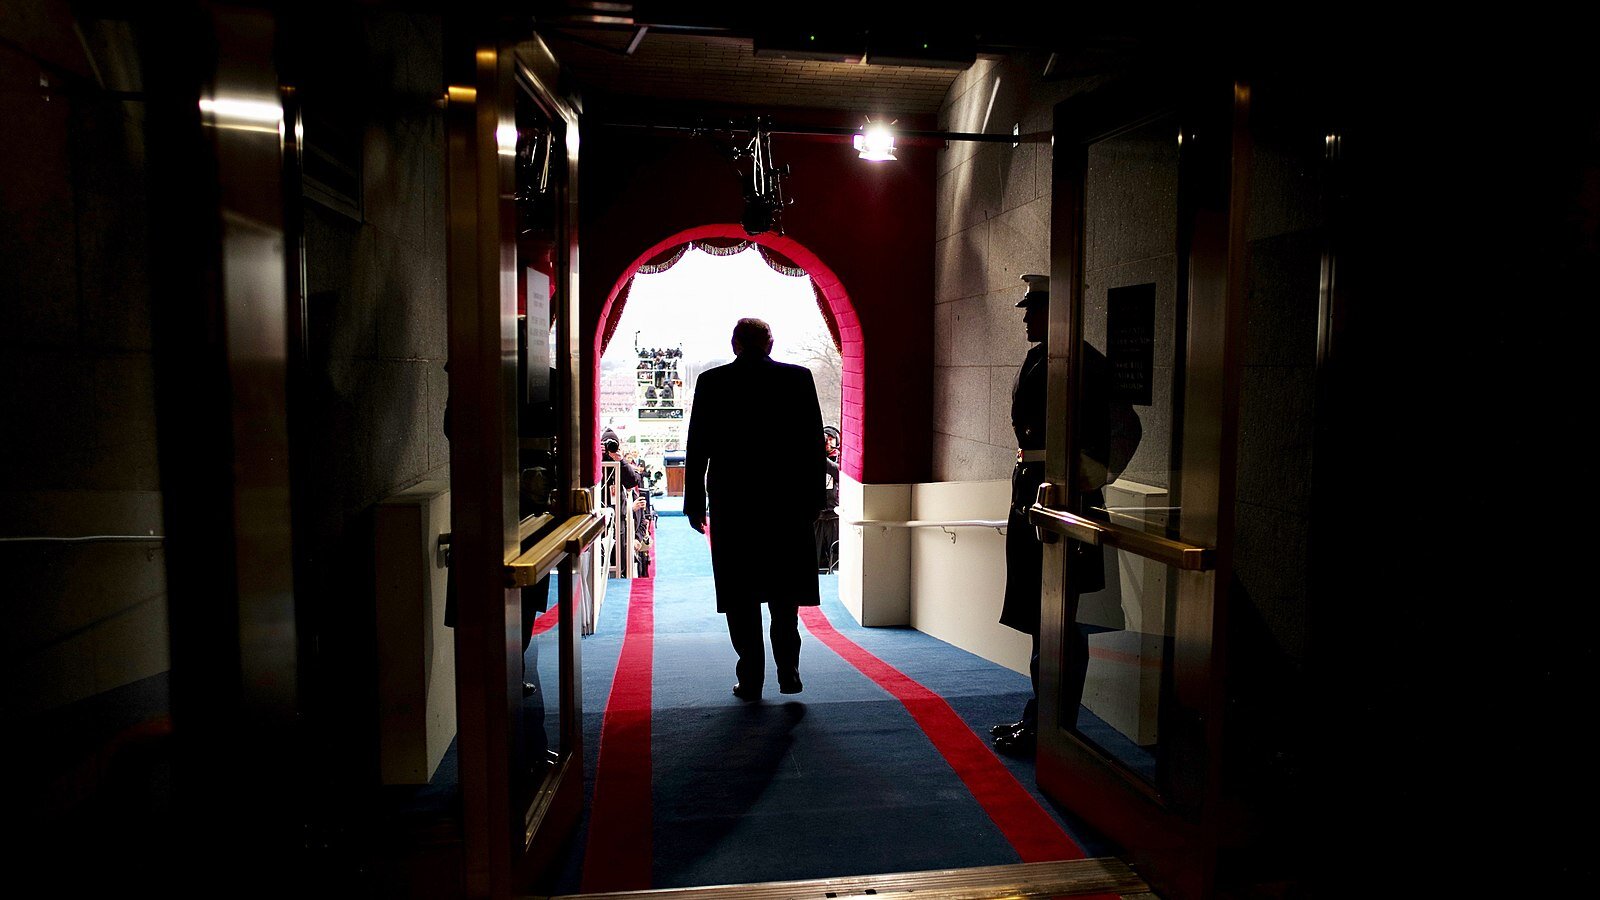 January 20th, 2017 – A behind-the-scenes look as Donald Trump walks out to be sworn in as America's 45th President. (Photo by the White House | Wikimedia Commons)